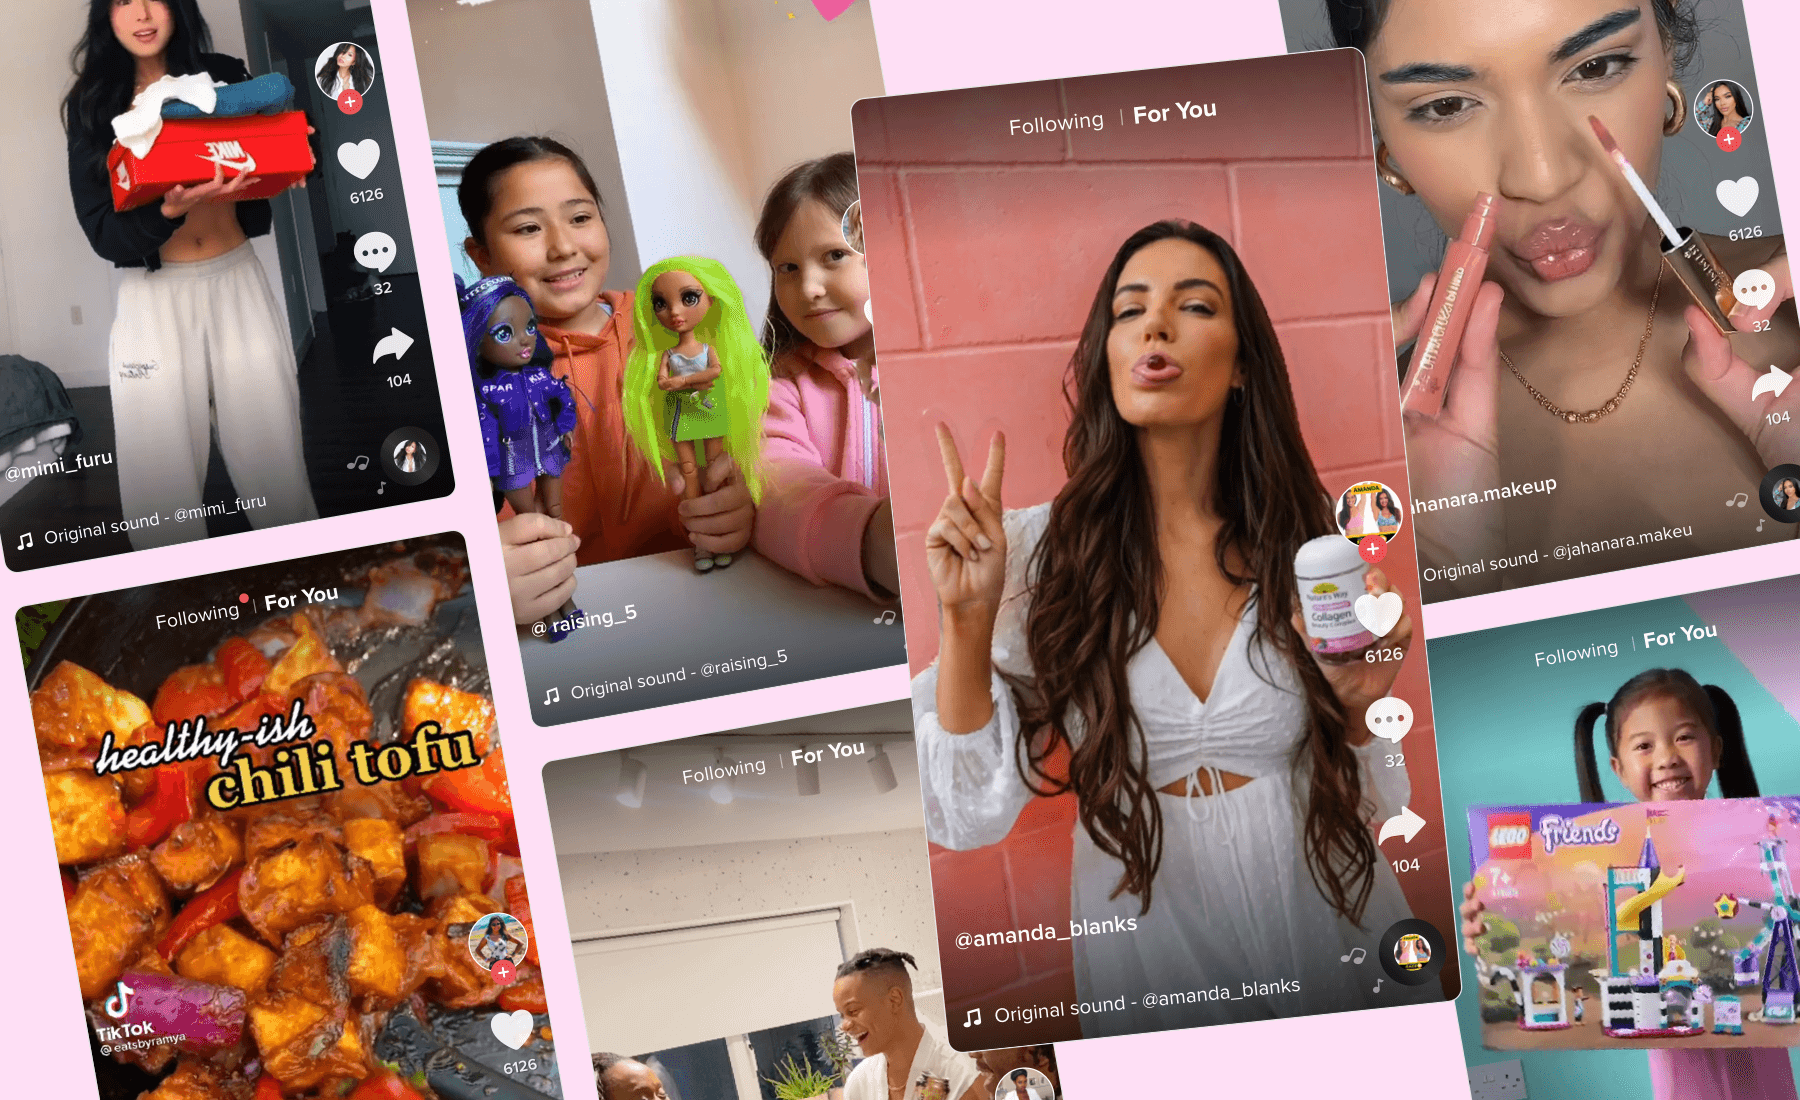 10 Problems With Every Social Media Influencer?